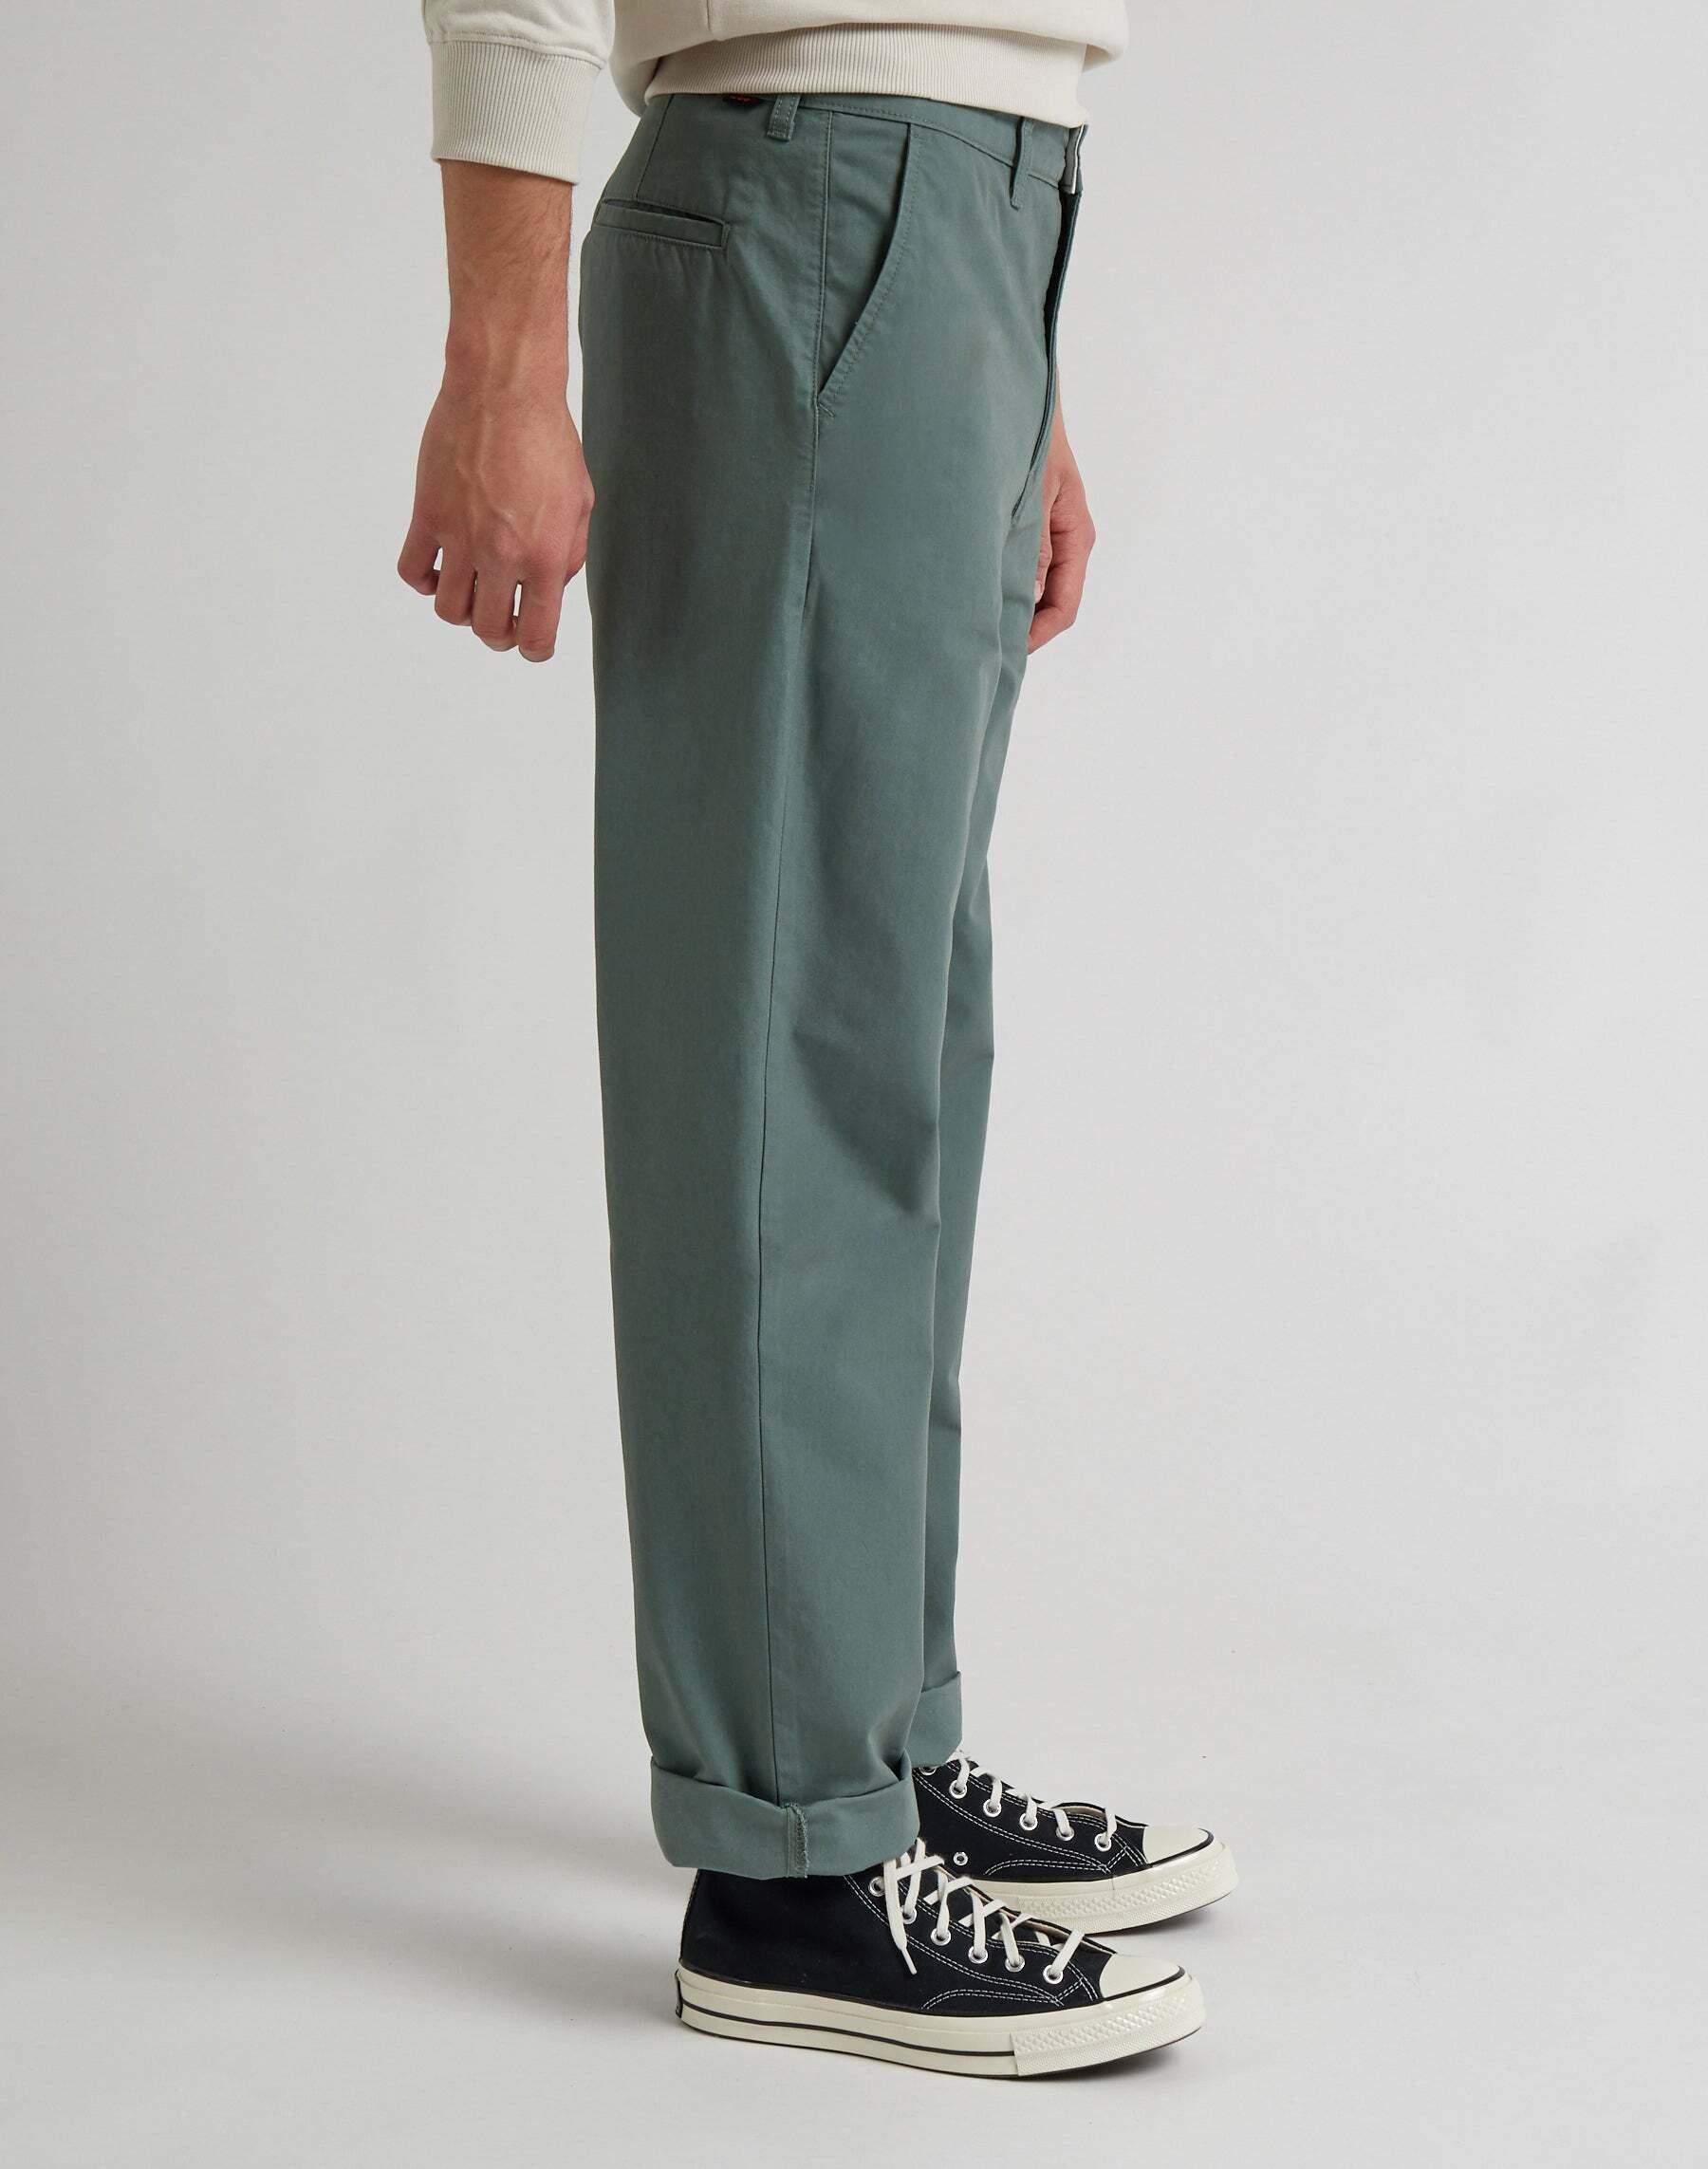 Lee  Chinos Relaxed Chino 